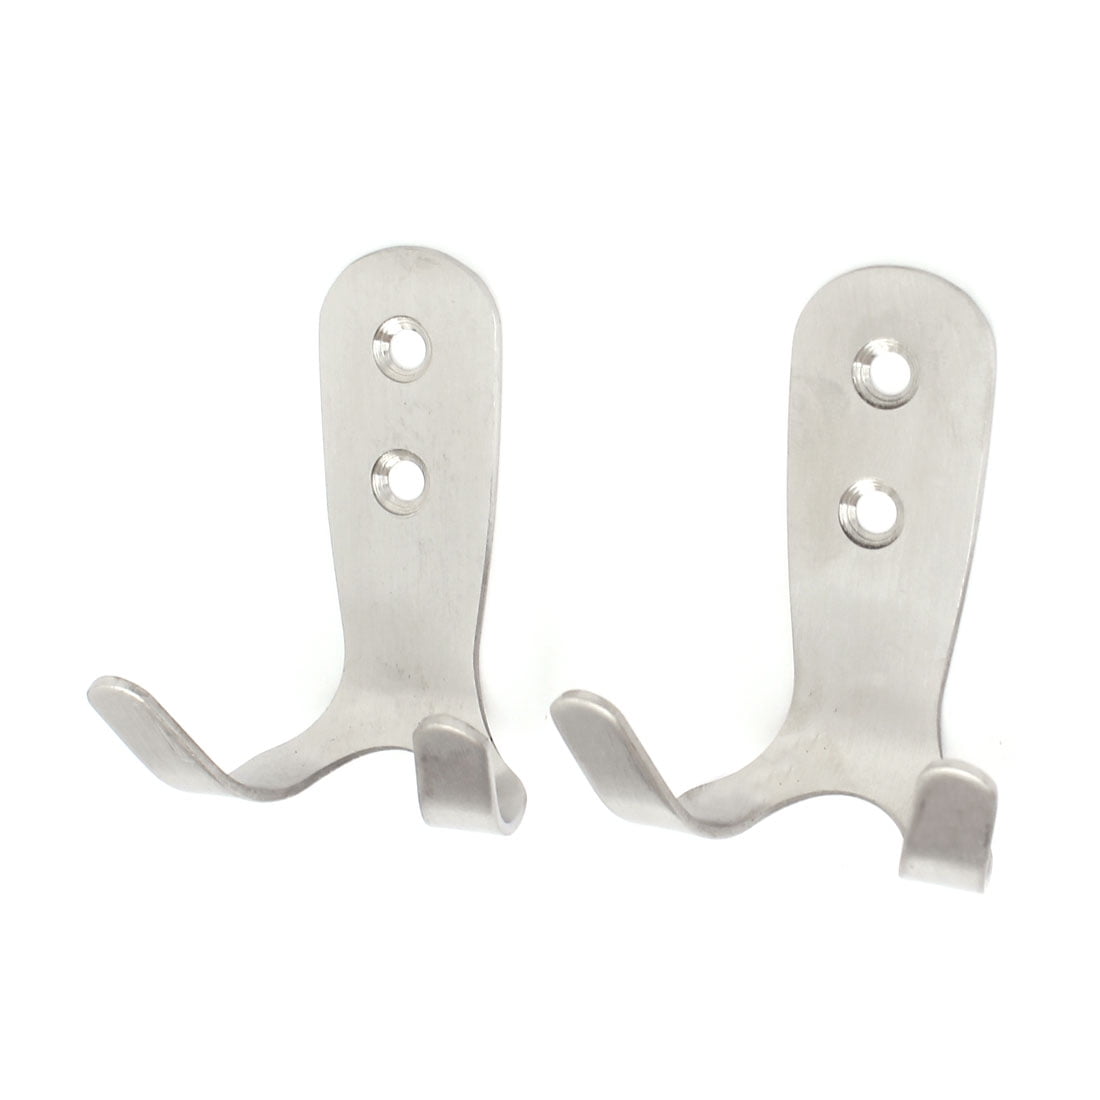 Details about   Wardrobe Wall Door Clothes Coat Hat Stainless Steel Double Hooks Hanger 2pcs 